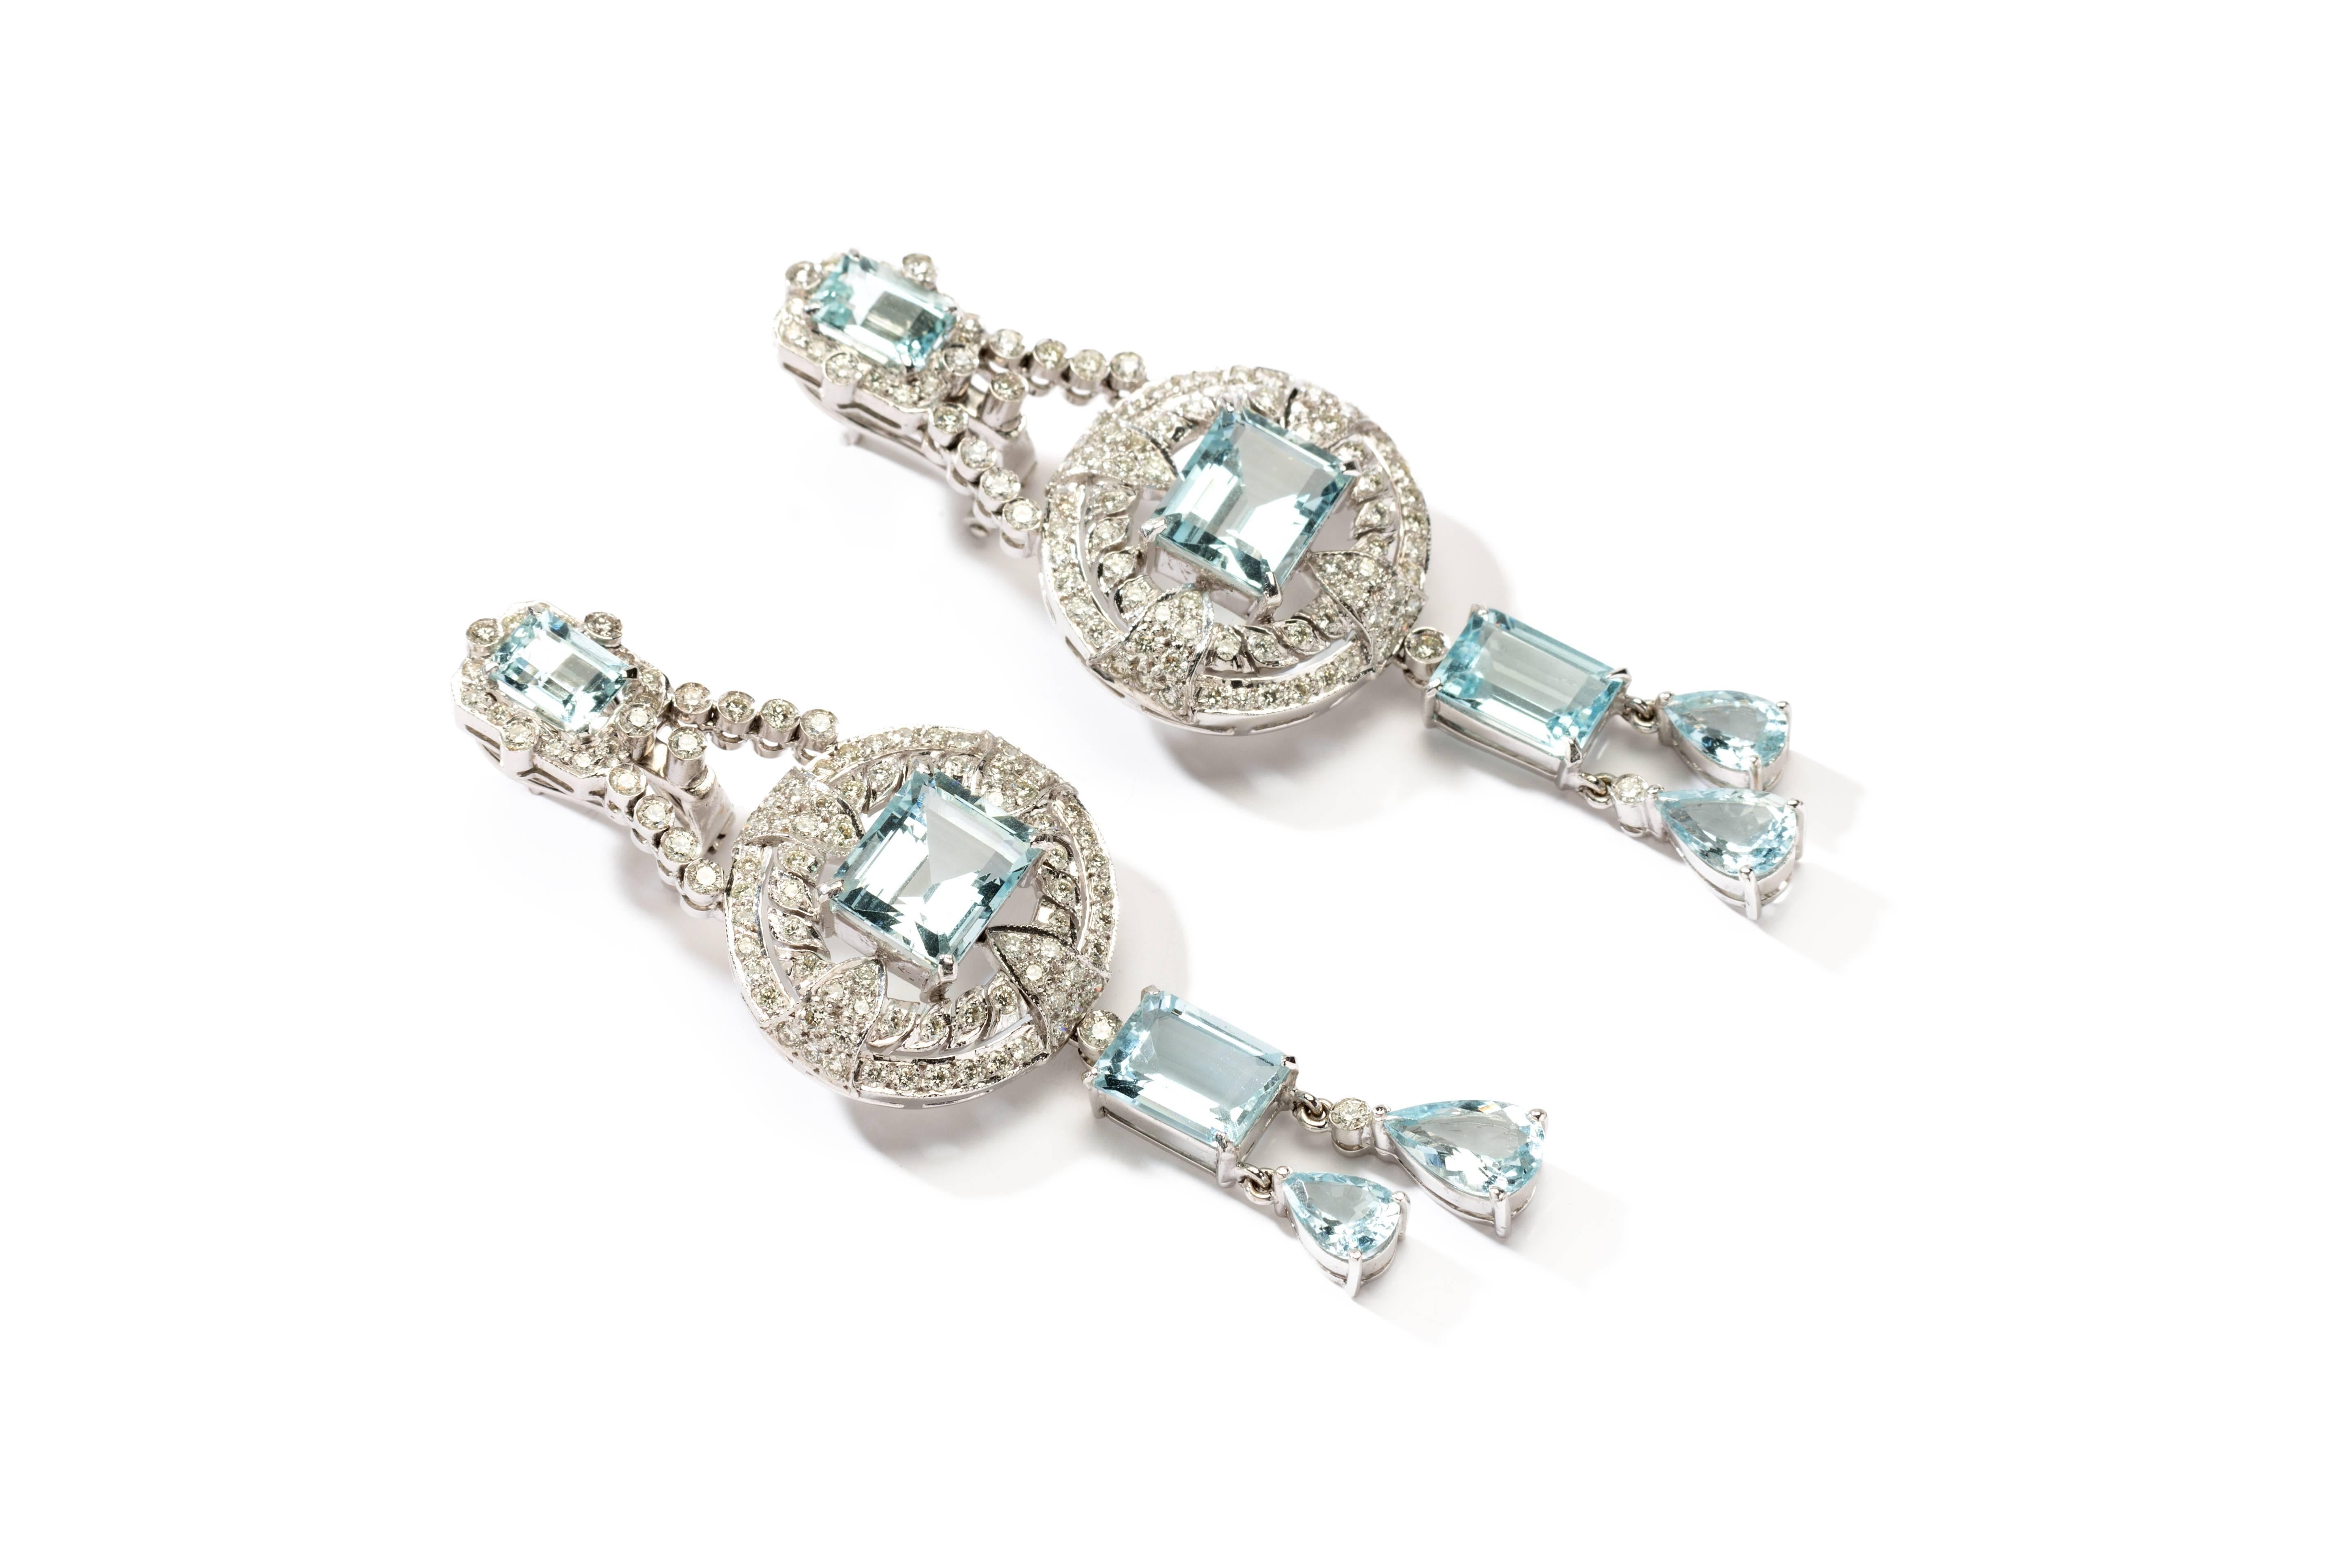 Composed with 6 rectangular-cut aquamarine and 4 tear drop shape aquamarine weighing 14,74 carats, accented by 198 brilliant-cut diamonds weighing 1,98 carats. Mounted in 18K white gold. 
Total weight: 23,89 g. Length: 2.56 in ( 6,5 cm ), Width: